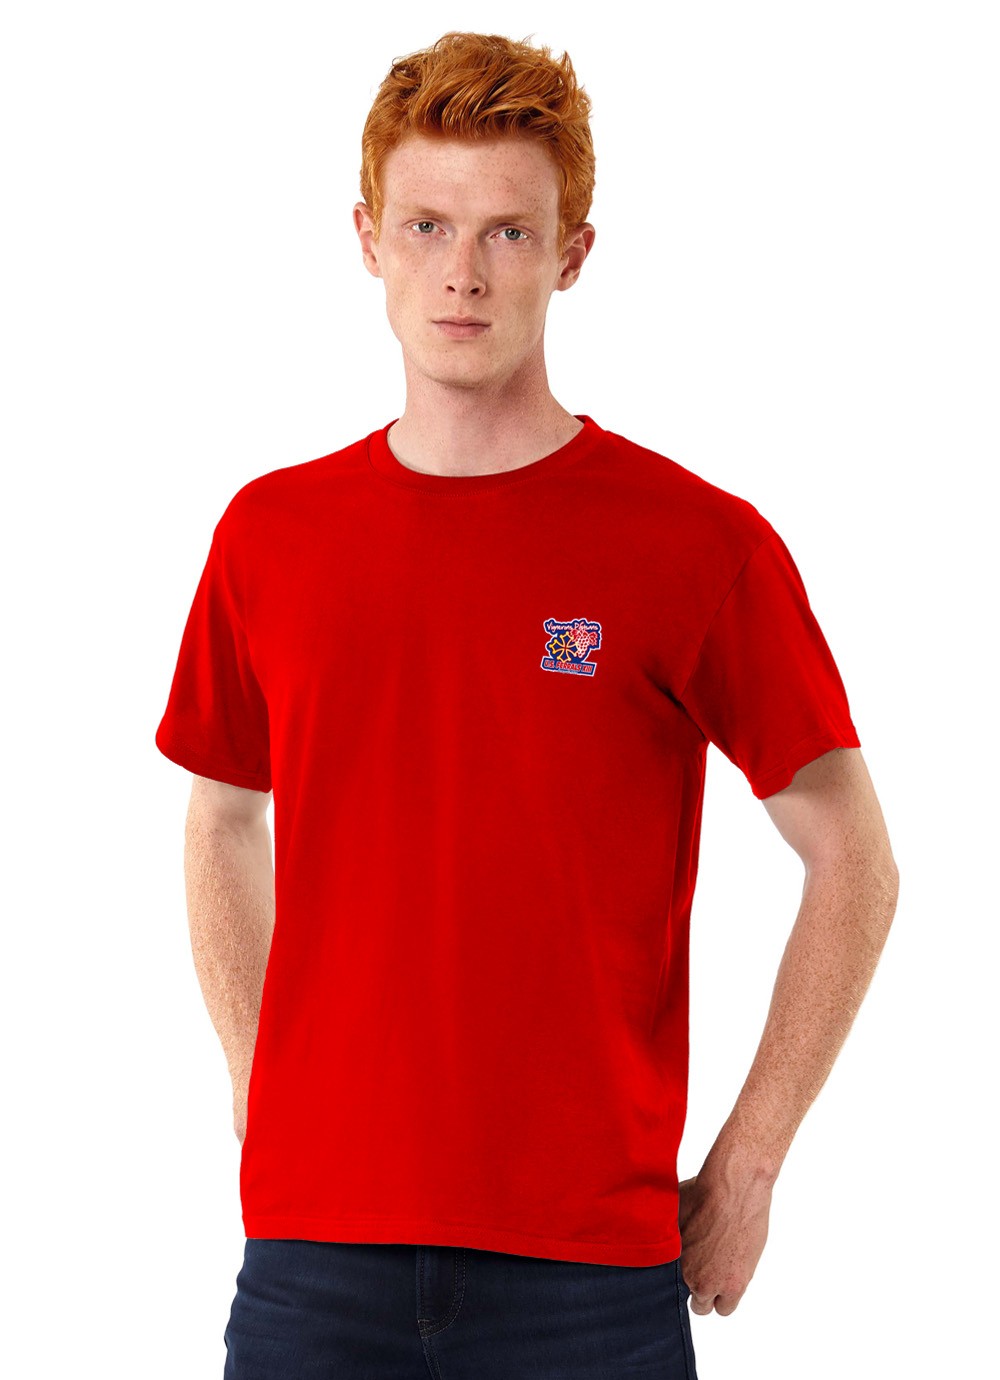 Tshirt homme US Ferrals XIII rouge